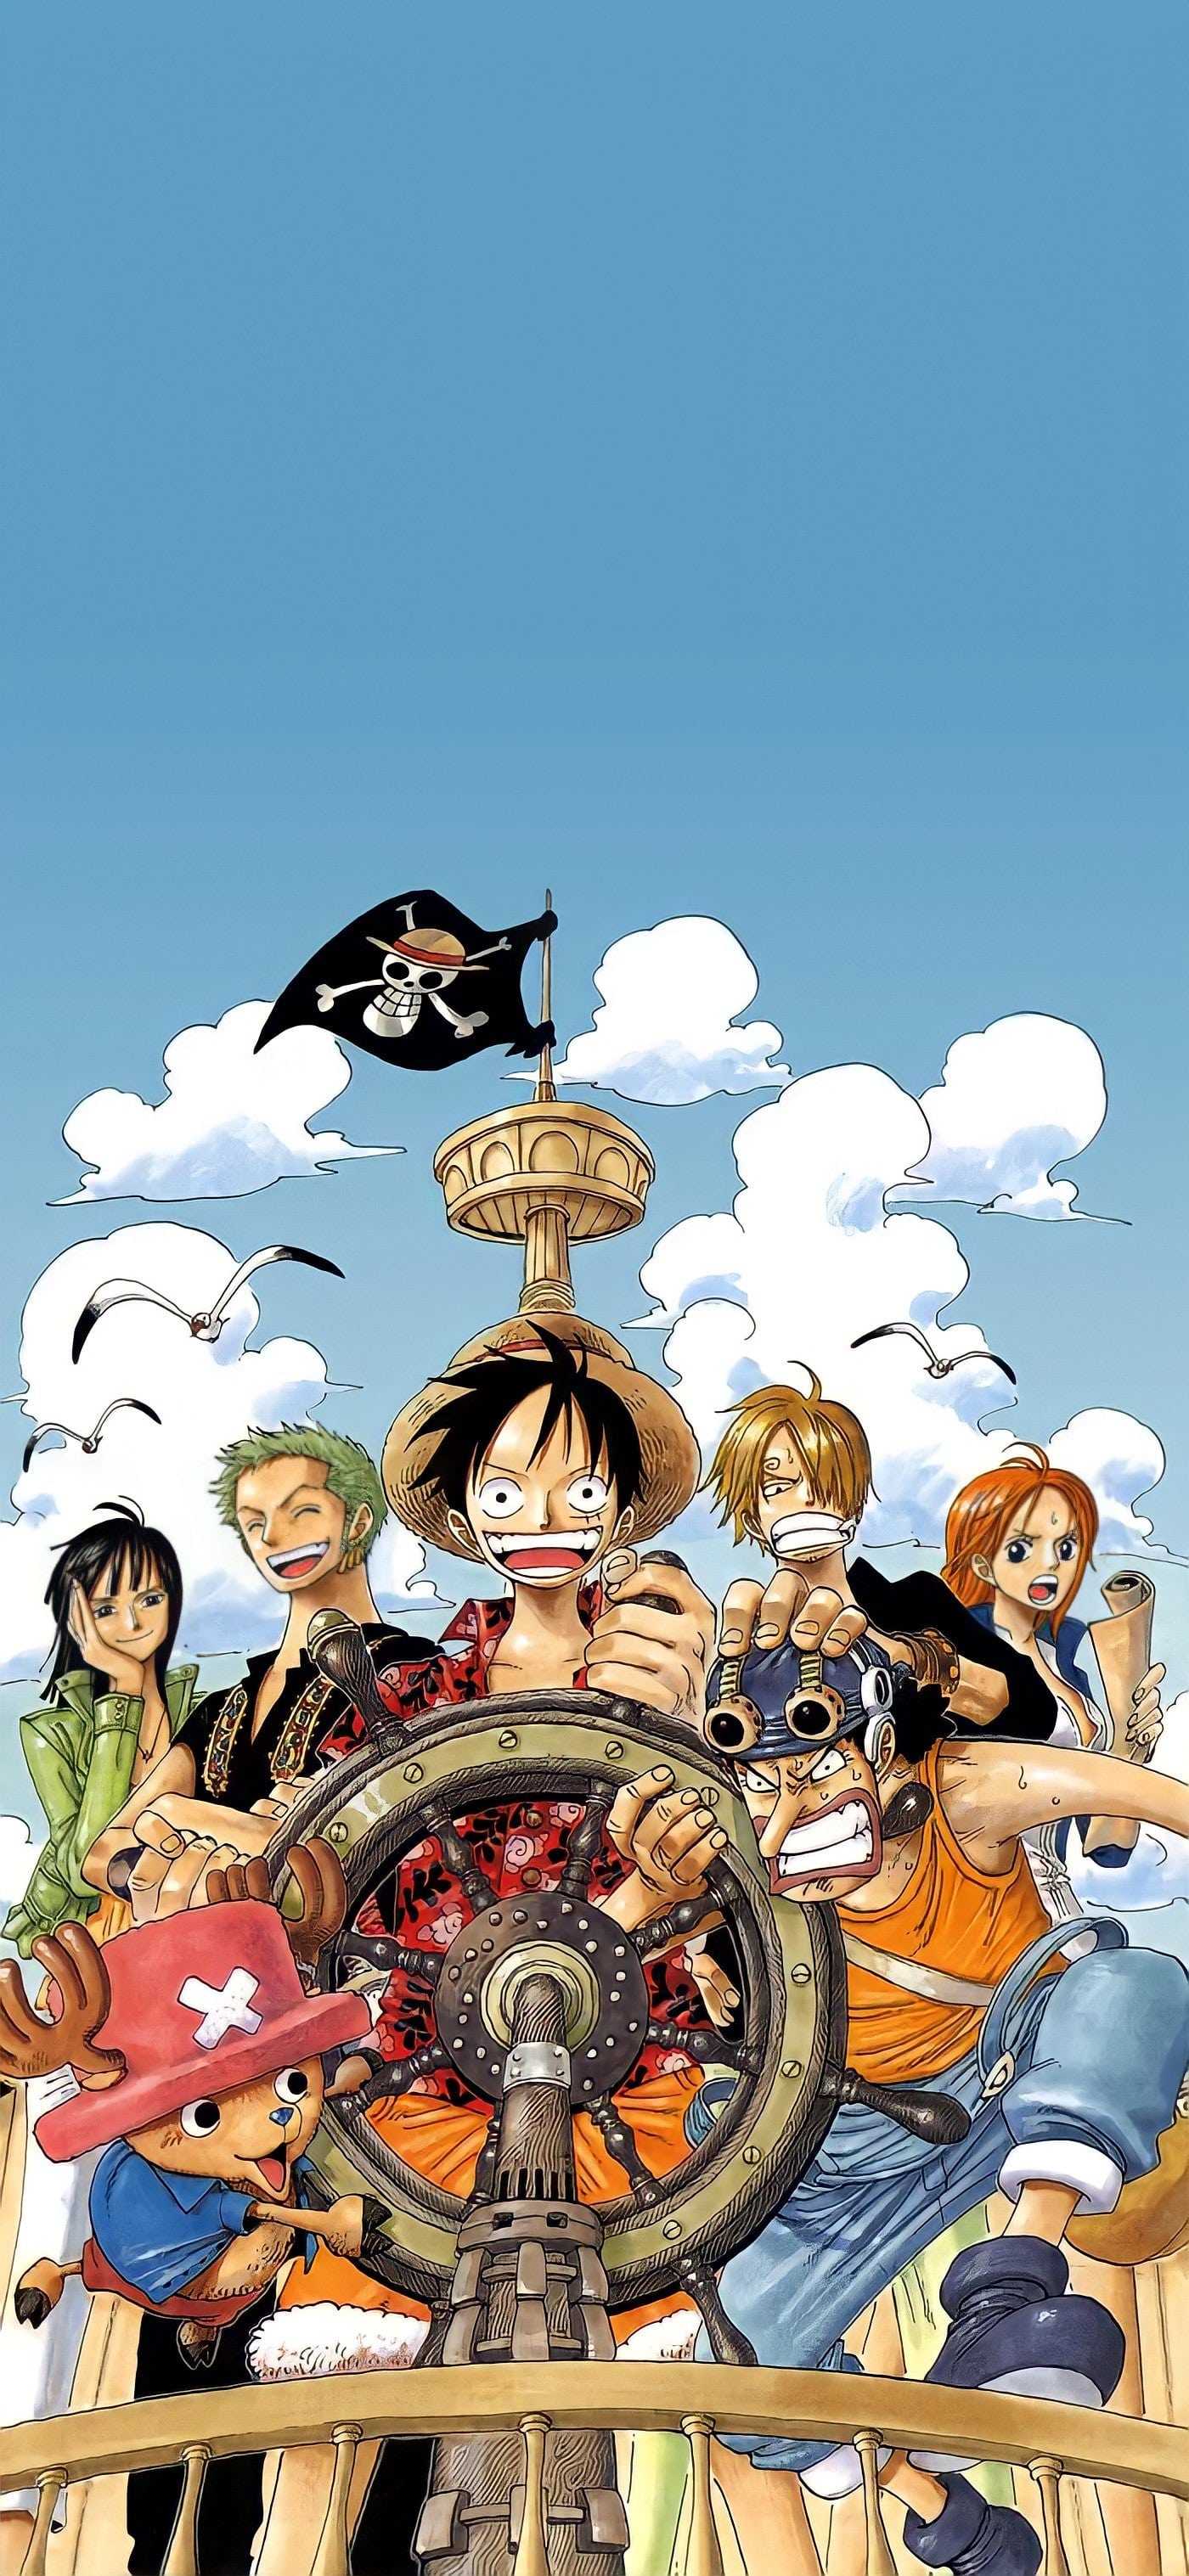 One Piece Wallpaper 2k22  One piece wallpaper iphone, Anime